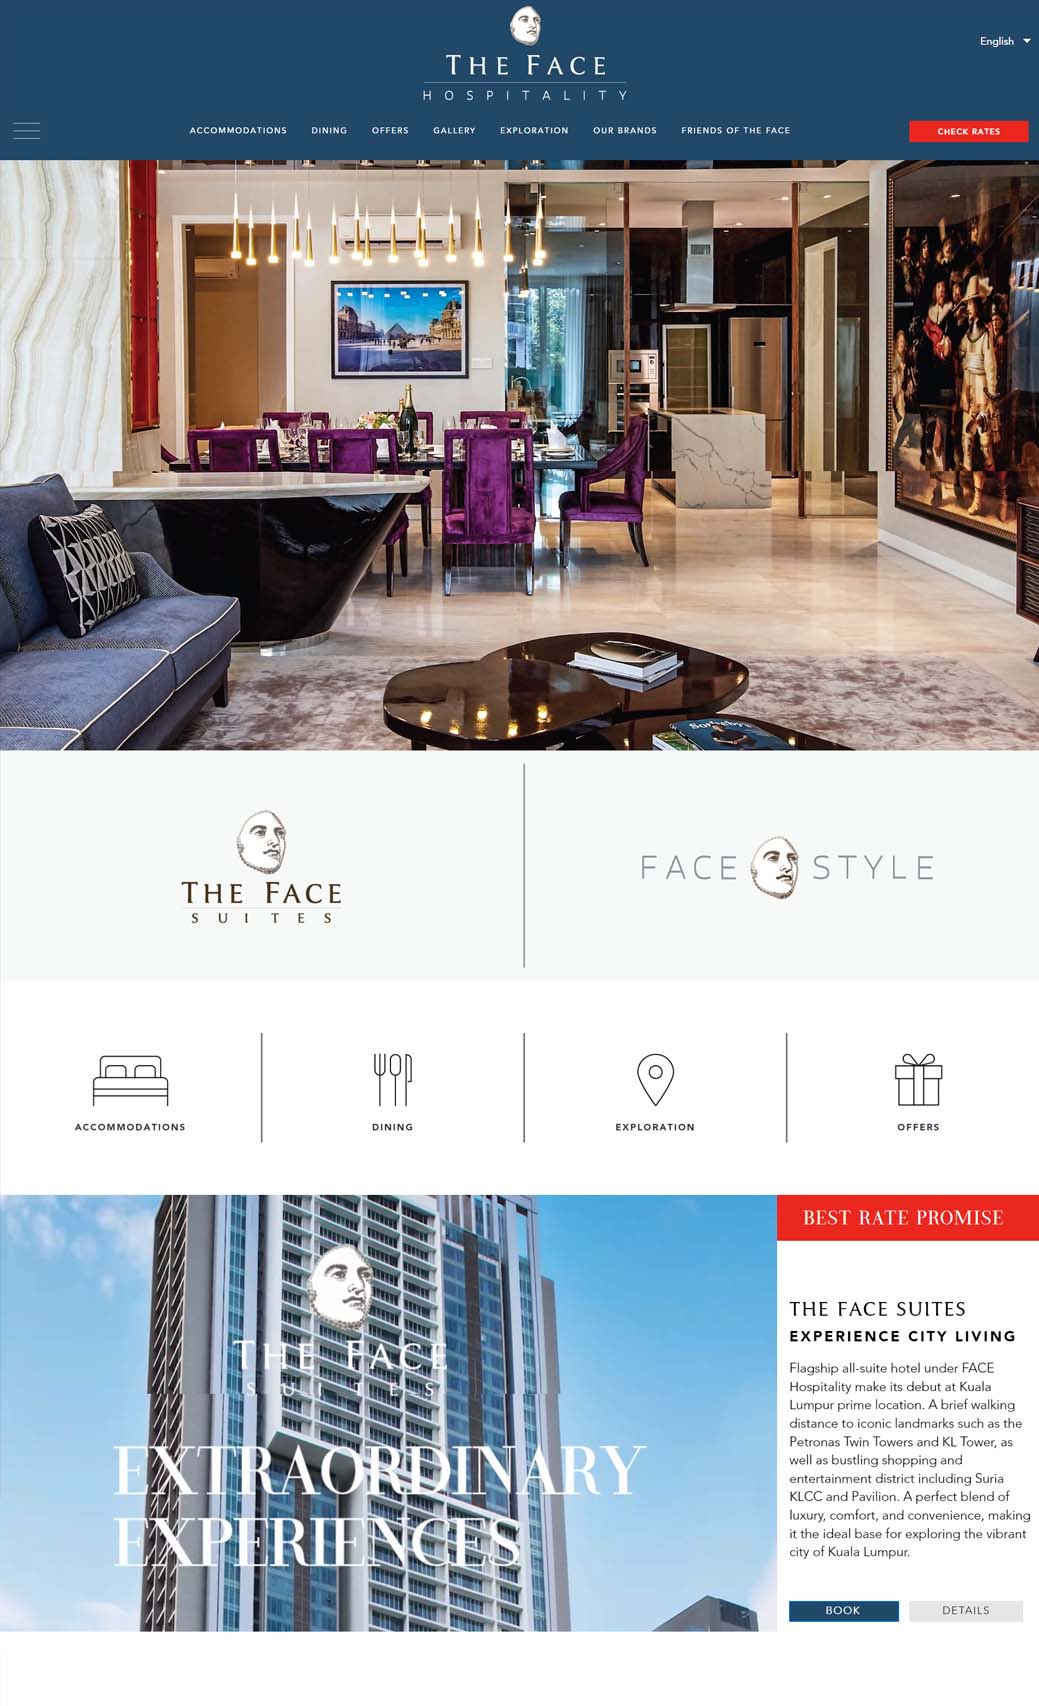 The Face Hotel